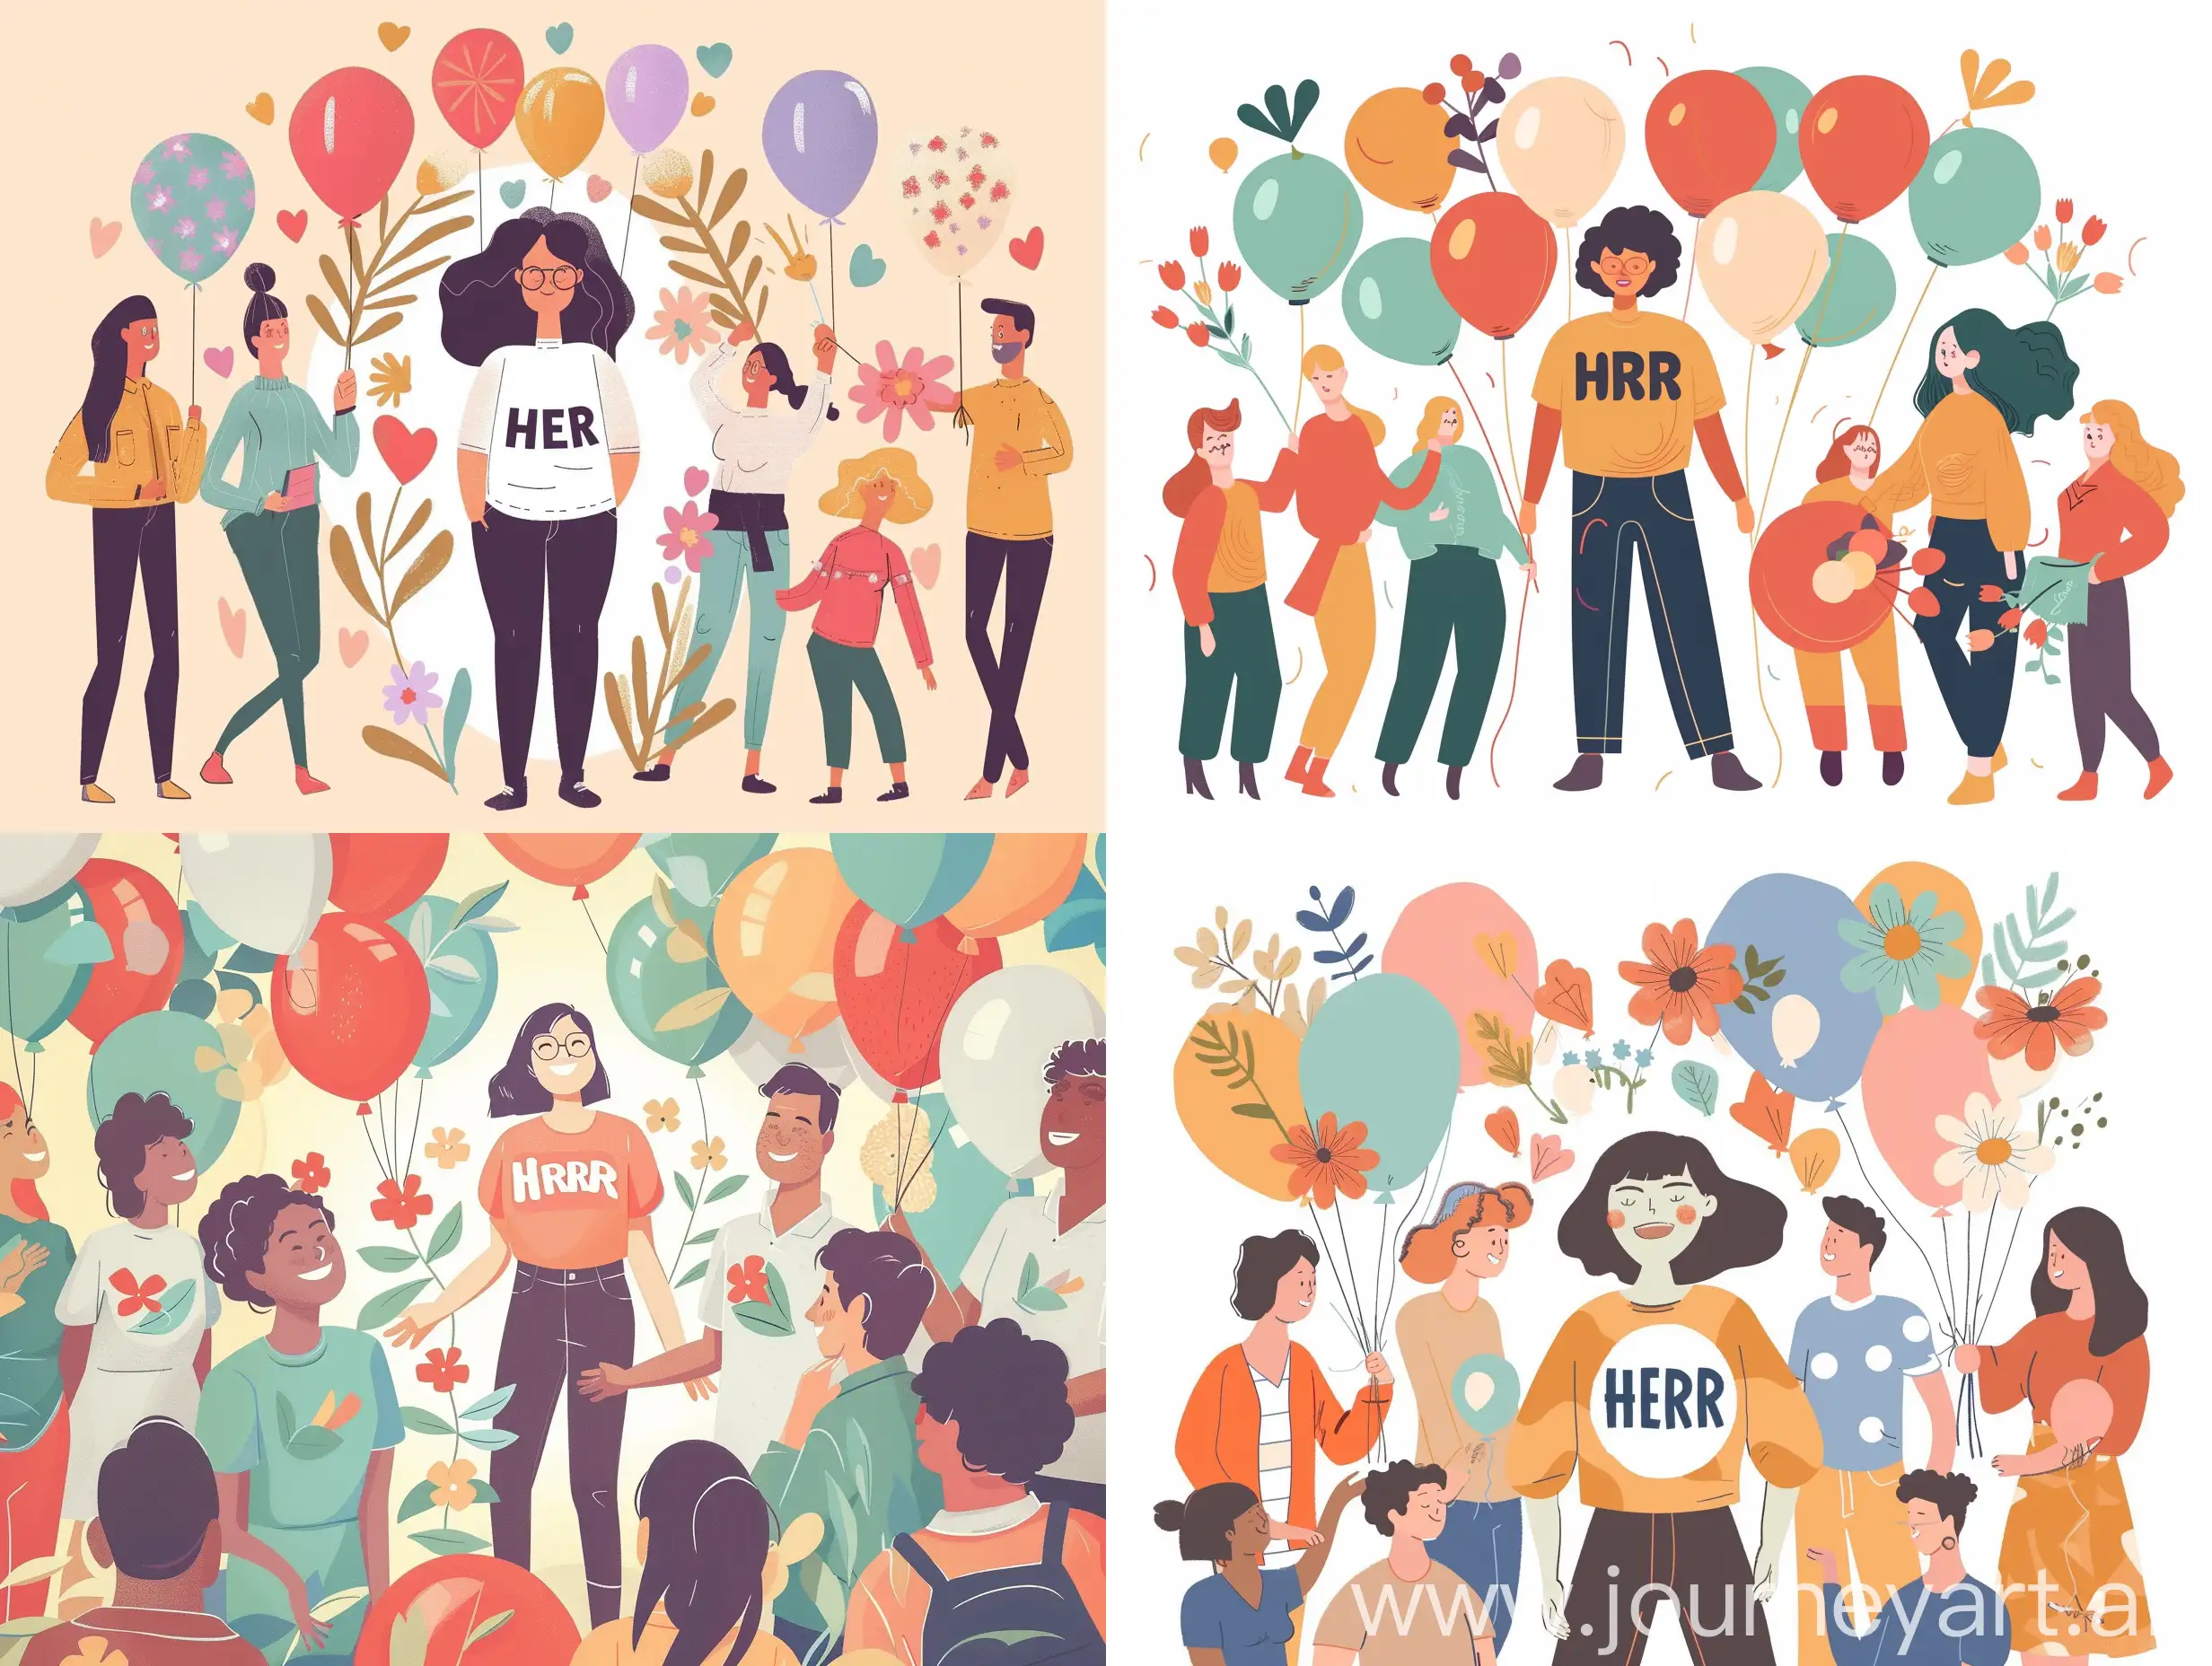 Create a picture, where in the center there is a person with a shirt on that says HERA. Around the person there are collegues and friends who are celebrating the person with balloons and flowers. The mood is cheerful and happy.